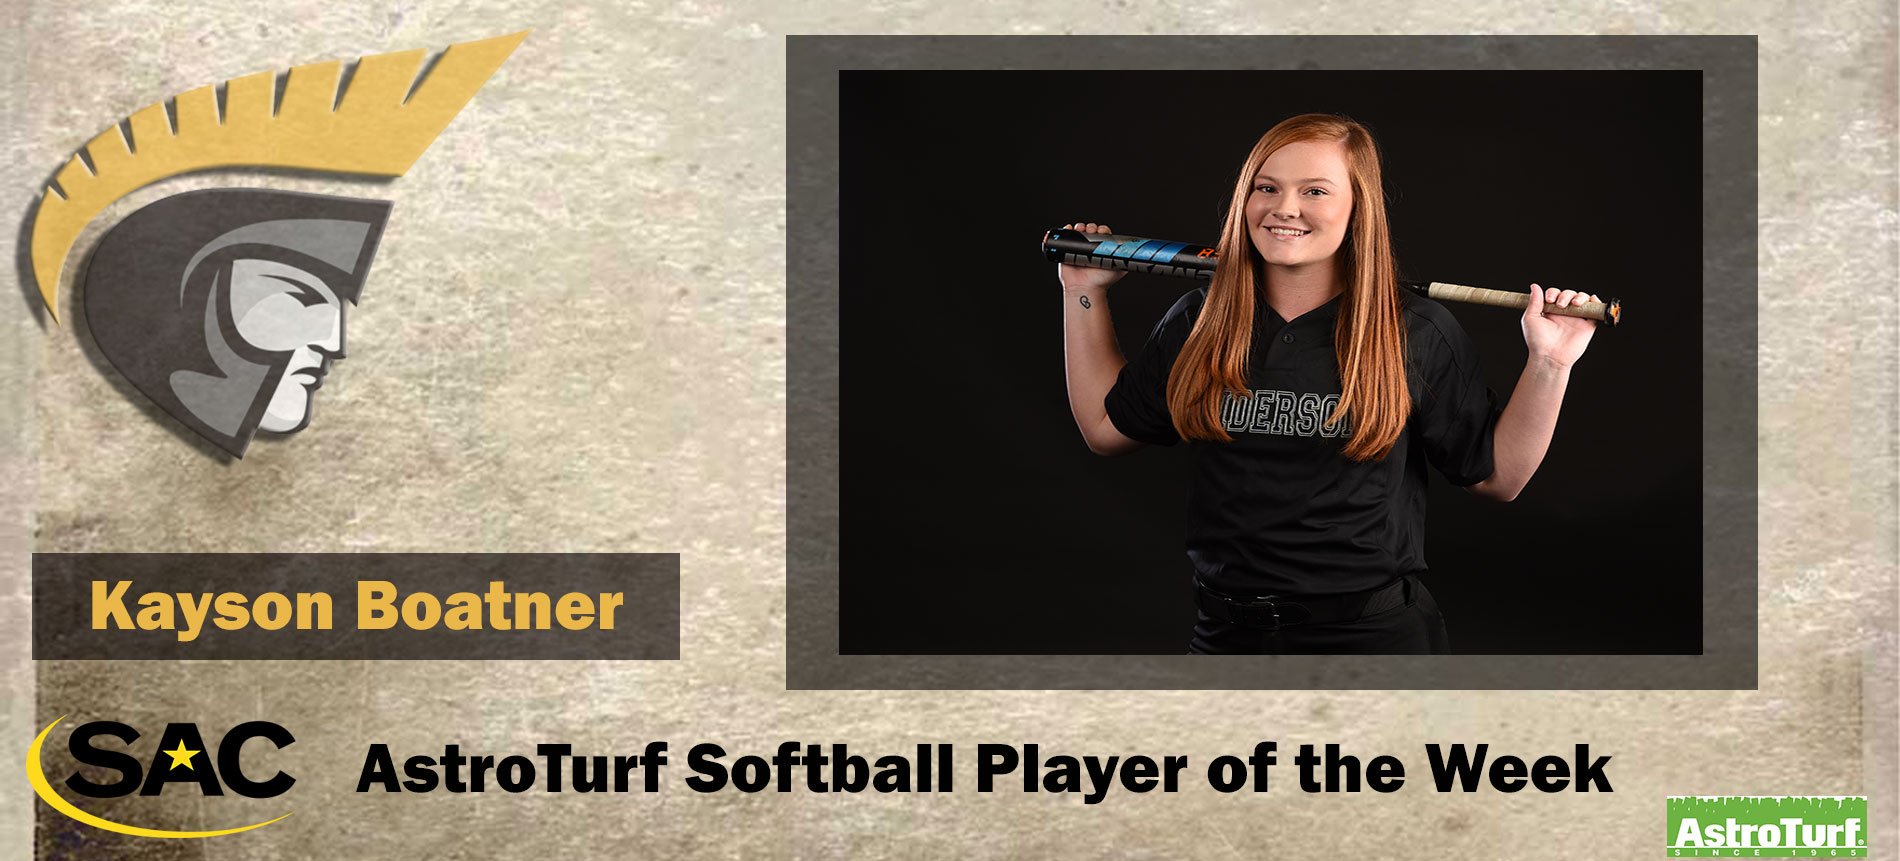 Boatner Earns South Atlantic Conference AstroTurf Softball Player of the Week